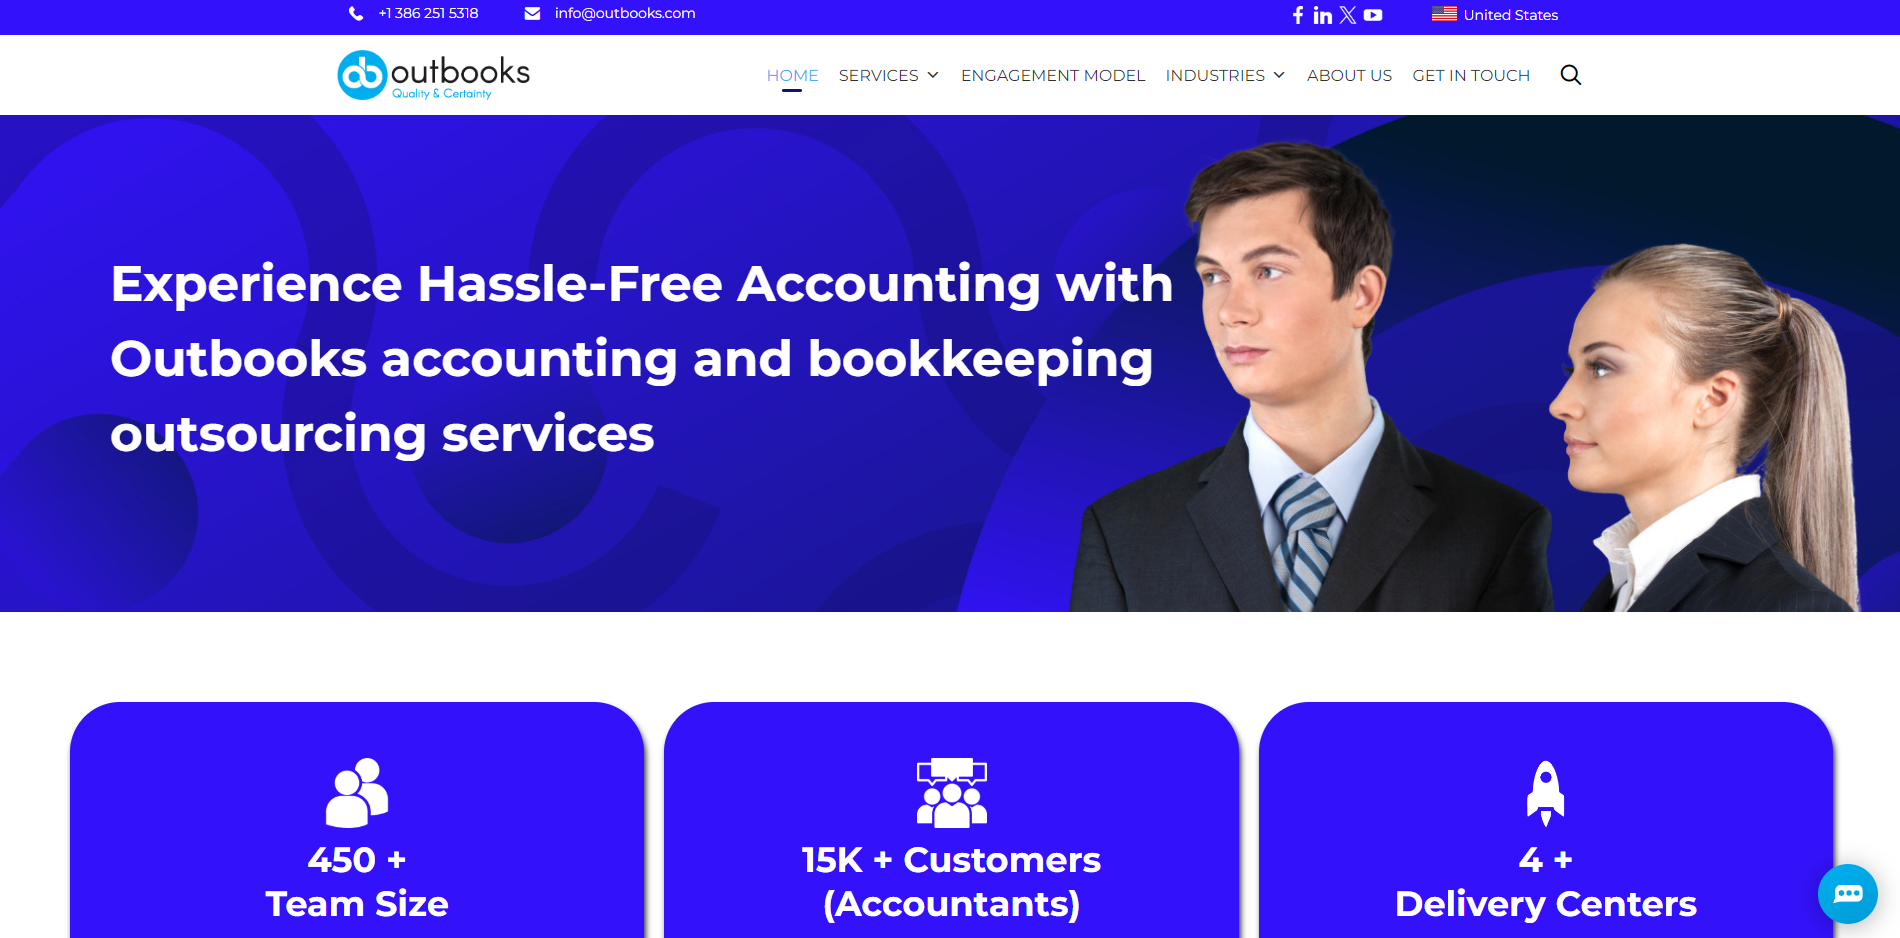 Accounting Services UK - Convert Leads